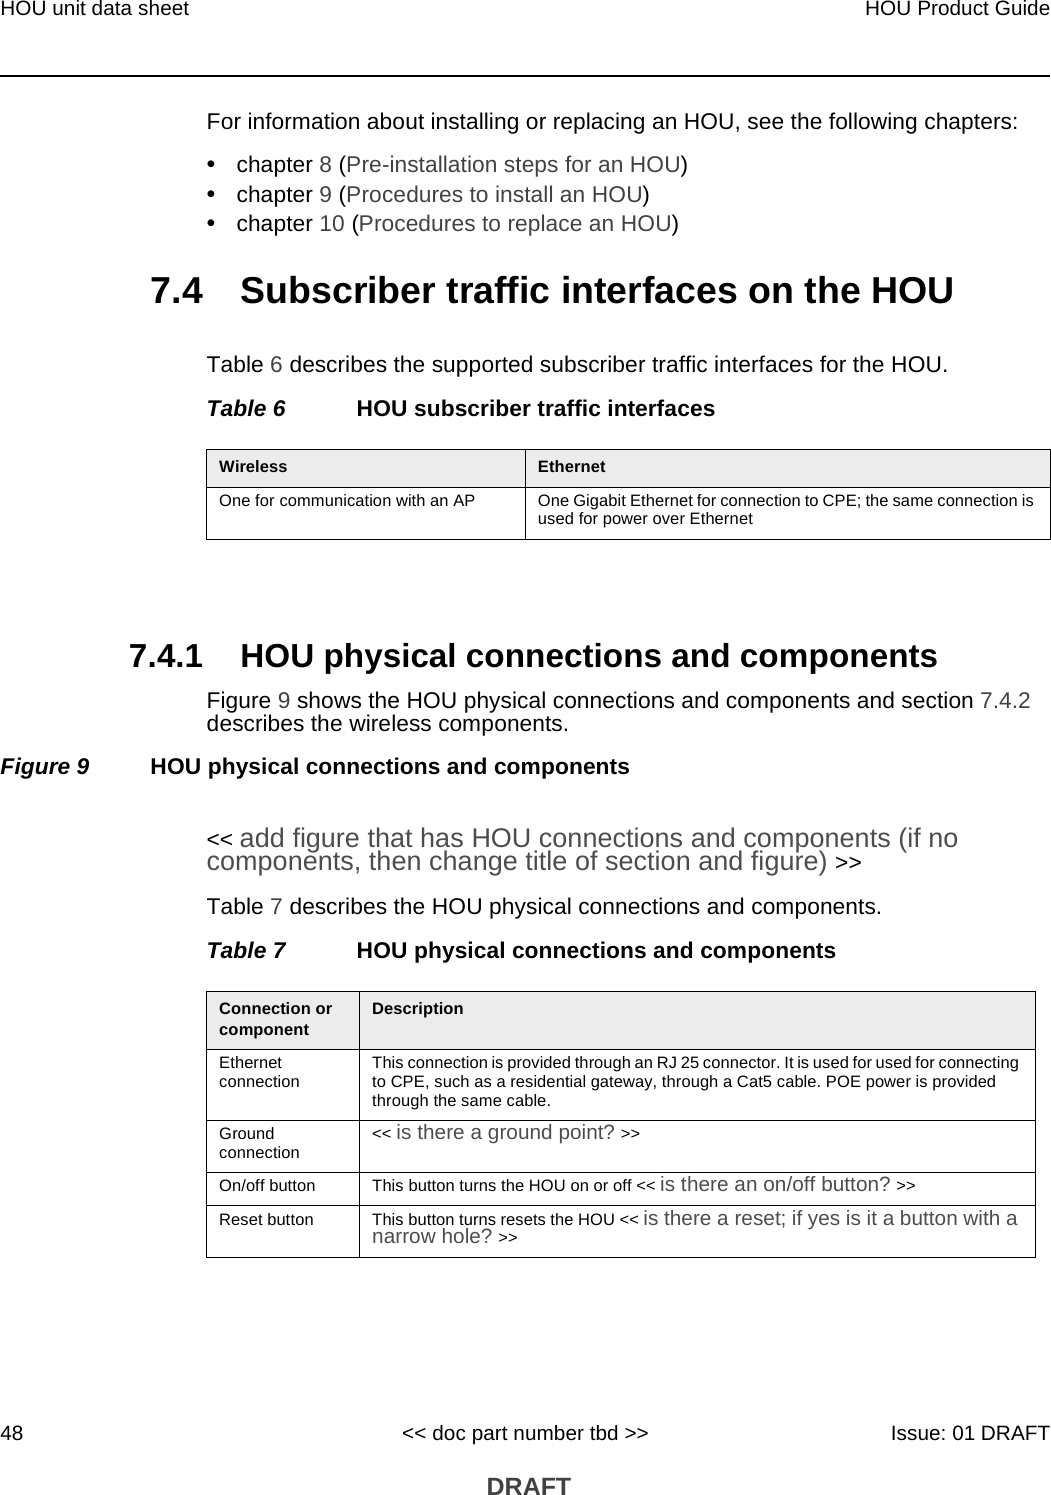 HOU unit data sheet48HOU Product Guide&lt;&lt; doc part number tbd &gt;&gt; Issue: 01 DRAFT DRAFTFor information about installing or replacing an HOU, see the following chapters:•chapter 8 (Pre-installation steps for an HOU)•chapter 9 (Procedures to install an HOU)•chapter 10 (Procedures to replace an HOU)7.4 Subscriber traffic interfaces on the HOUTable 6 describes the supported subscriber traffic interfaces for the HOU. Table 6 HOU subscriber traffic interfaces7.4.1 HOU physical connections and componentsFigure 9 shows the HOU physical connections and components and section 7.4.2 describes the wireless components.Figure 9 HOU physical connections and components&lt;&lt; add figure that has HOU connections and components (if no components, then change title of section and figure) &gt;&gt;Table 7 describes the HOU physical connections and components.Table 7 HOU physical connections and componentsWireless EthernetOne for communication with an AP One Gigabit Ethernet for connection to CPE; the same connection is used for power over EthernetConnection or component DescriptionEthernet connection This connection is provided through an RJ 25 connector. It is used for used for connecting to CPE, such as a residential gateway, through a Cat5 cable. POE power is provided through the same cable.Ground connection &lt;&lt; is there a ground point? &gt;&gt; On/off button This button turns the HOU on or off &lt;&lt; is there an on/off button? &gt;&gt; Reset button This button turns resets the HOU &lt;&lt; is there a reset; if yes is it a button with a narrow hole? &gt;&gt; 